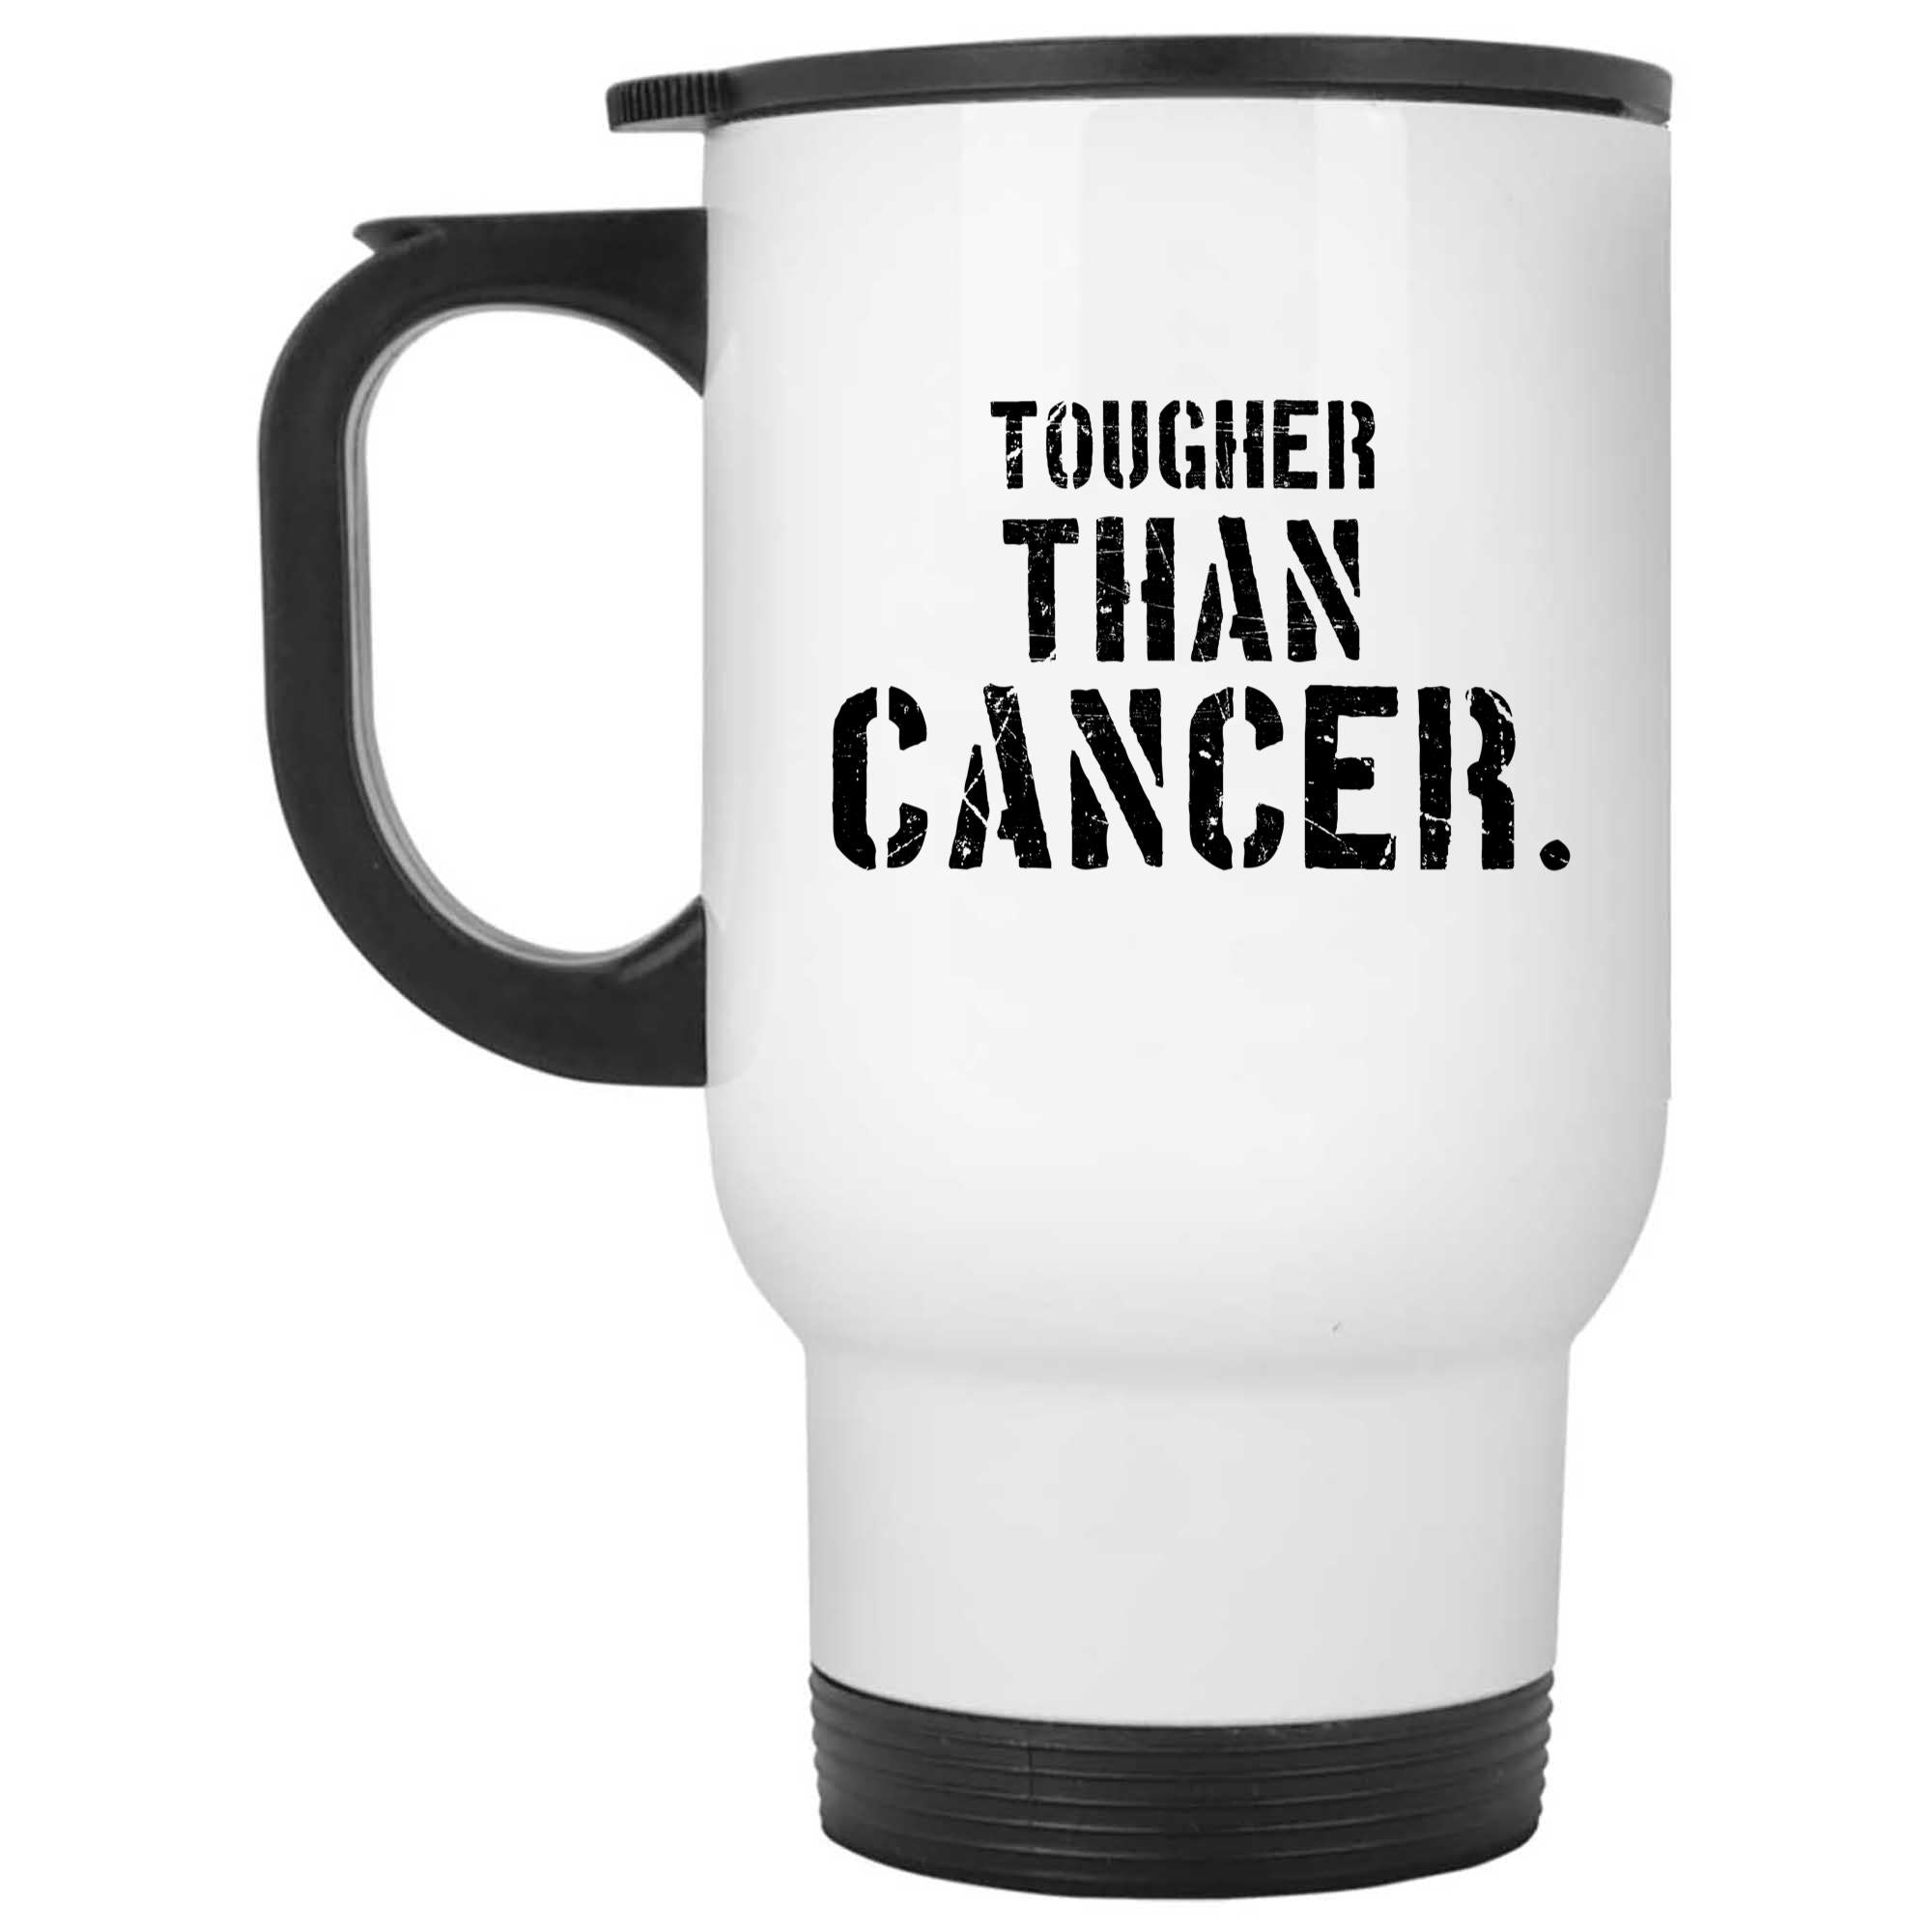 Skitongifts Funny Ceramic Novelty Coffee Mug Beat Cancer, Tougher Than Cancer. Funny For Cancer Patient, Lung Breast Cancer Survivors t1qaclD